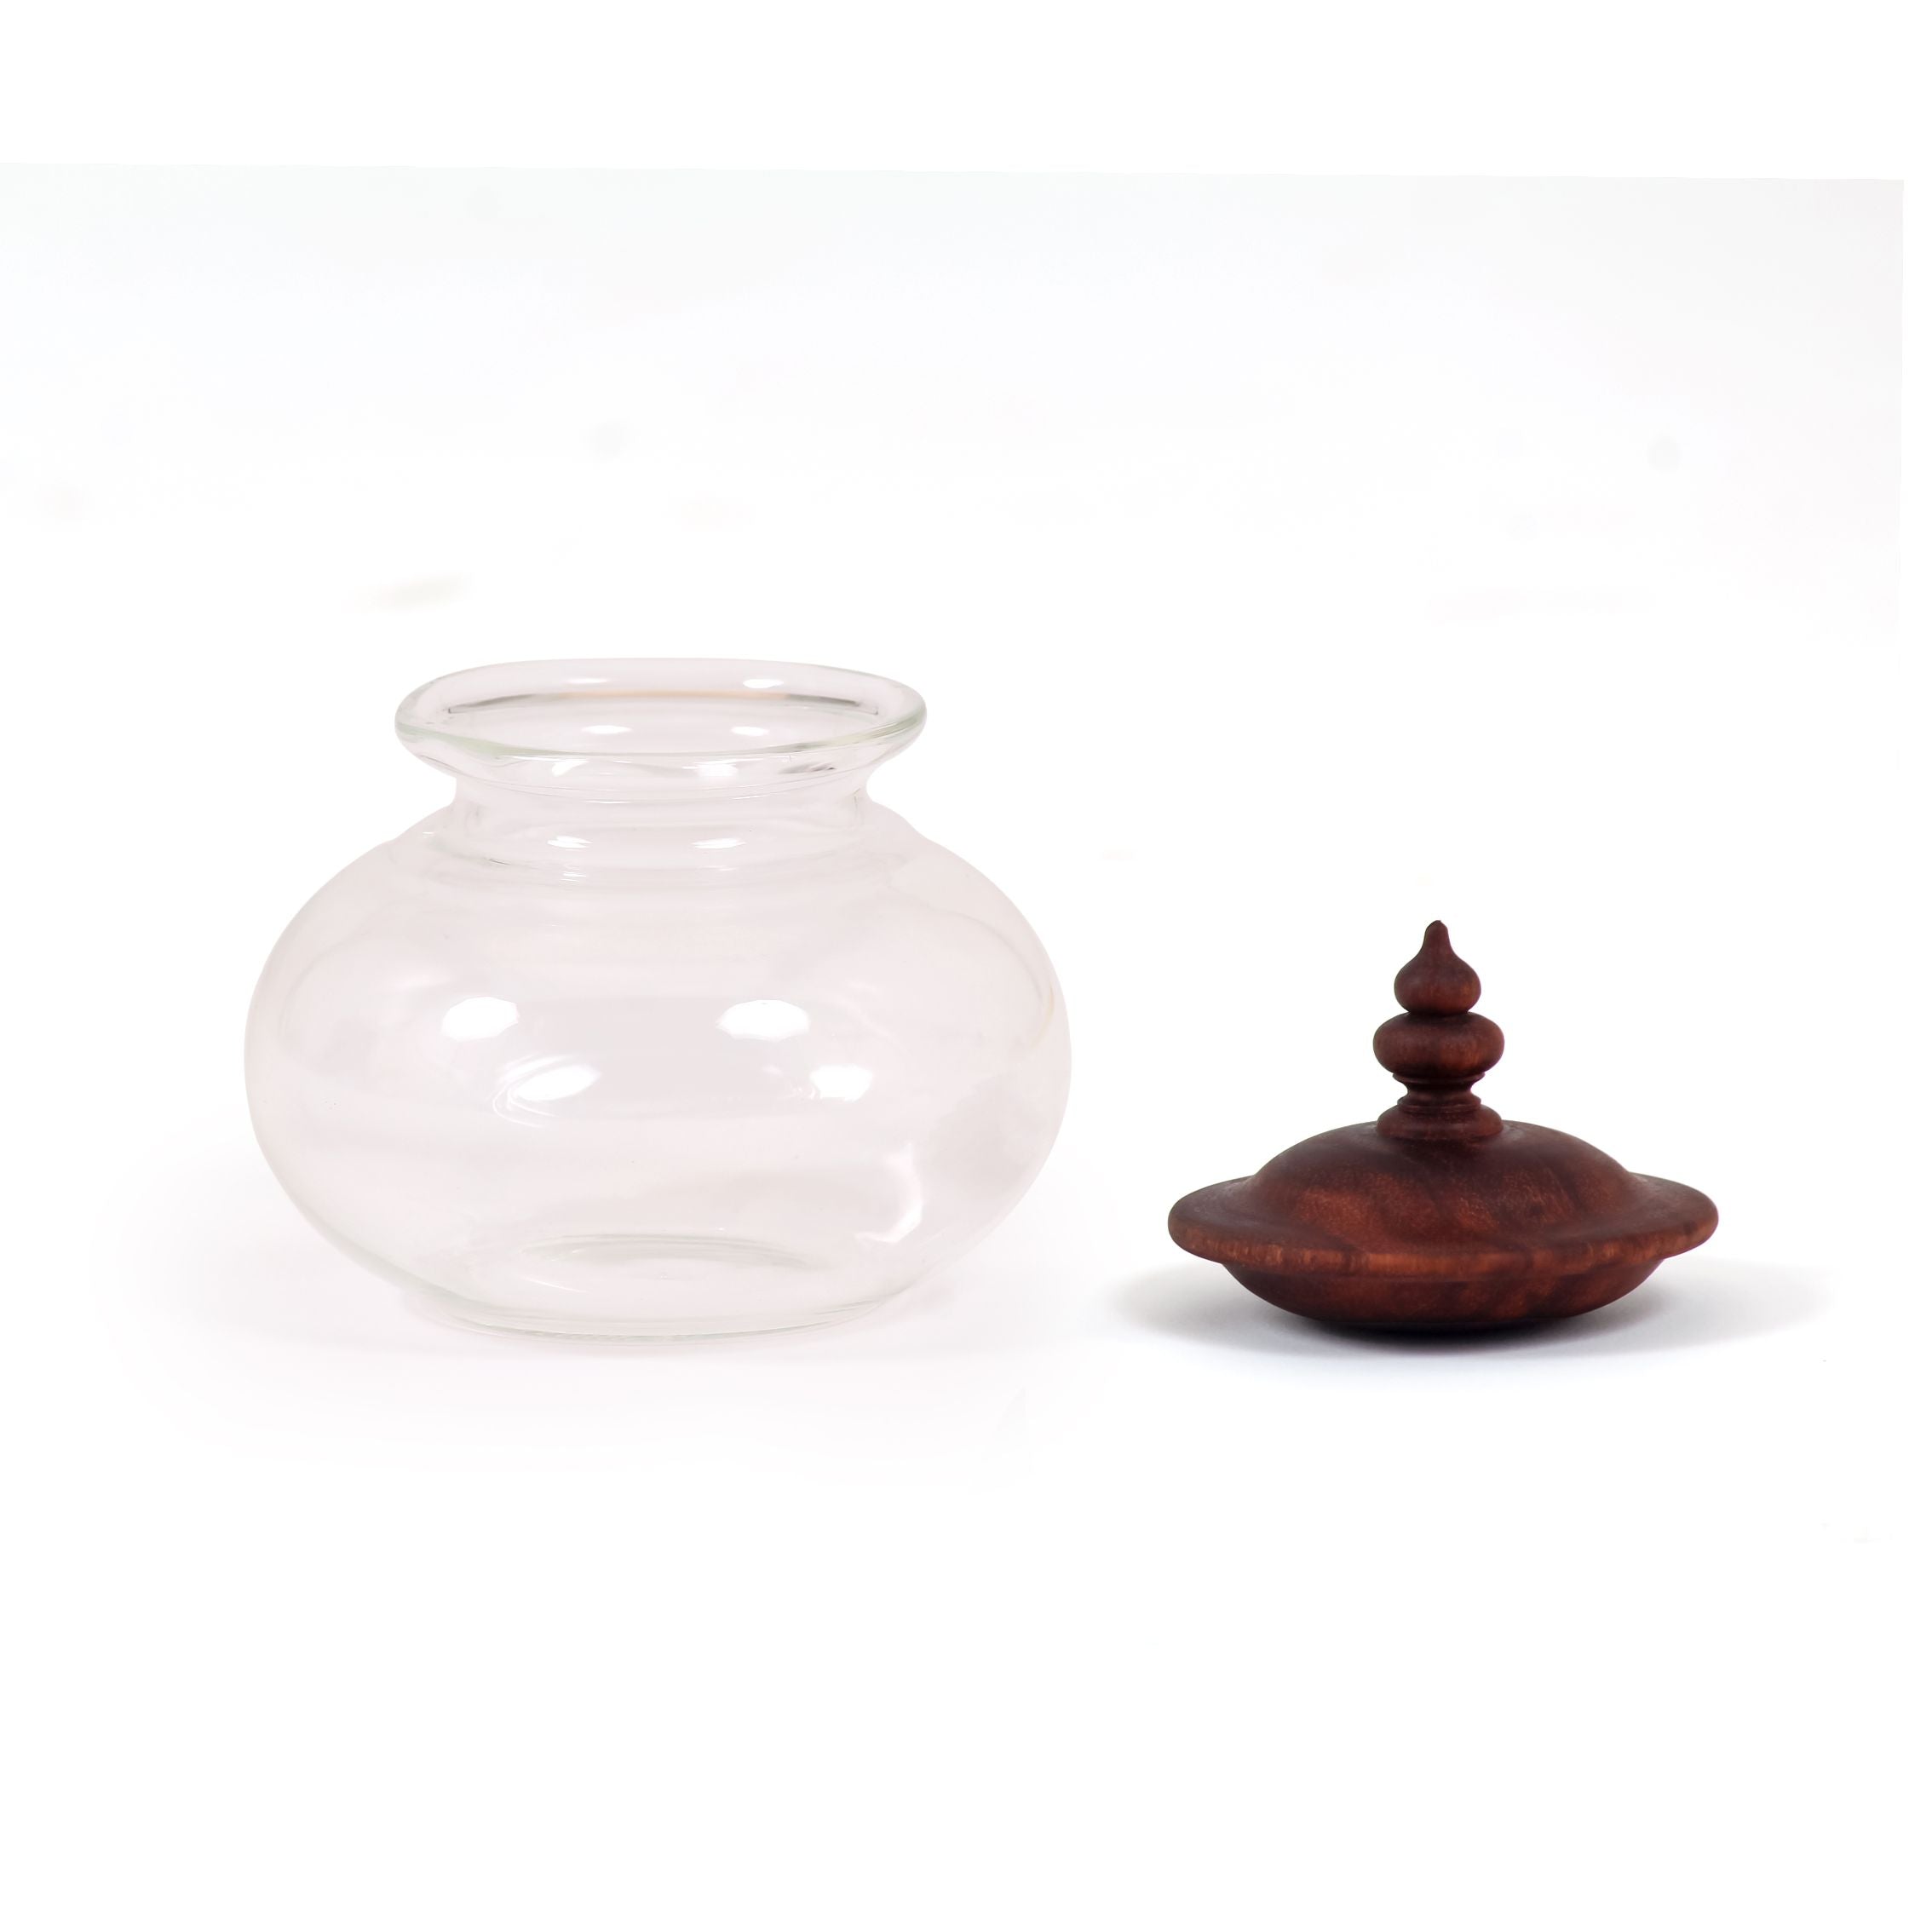 Jars, Indo-european shapes, handcrafted, laboratory glass, turned wooden lids, tradtional, decor, dining spaces, storage, serving, tabletop accessories, serving, storage